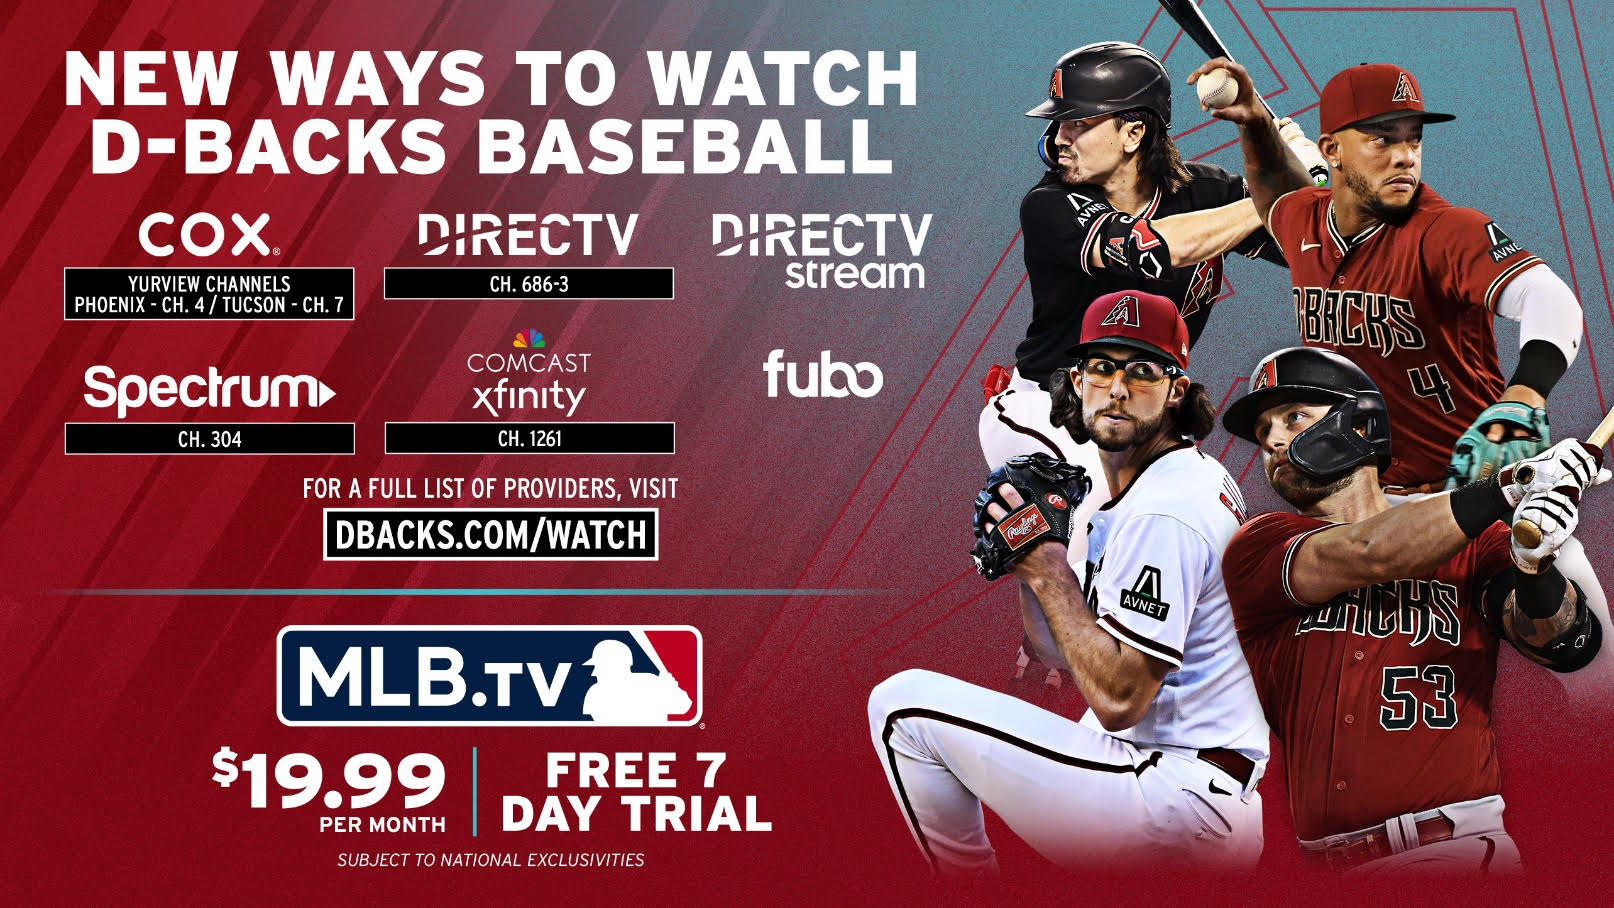 MLB Sets Up New Diamondbacks Channel, Claims Reach Has Expanded by 4.7 Million Homes vs